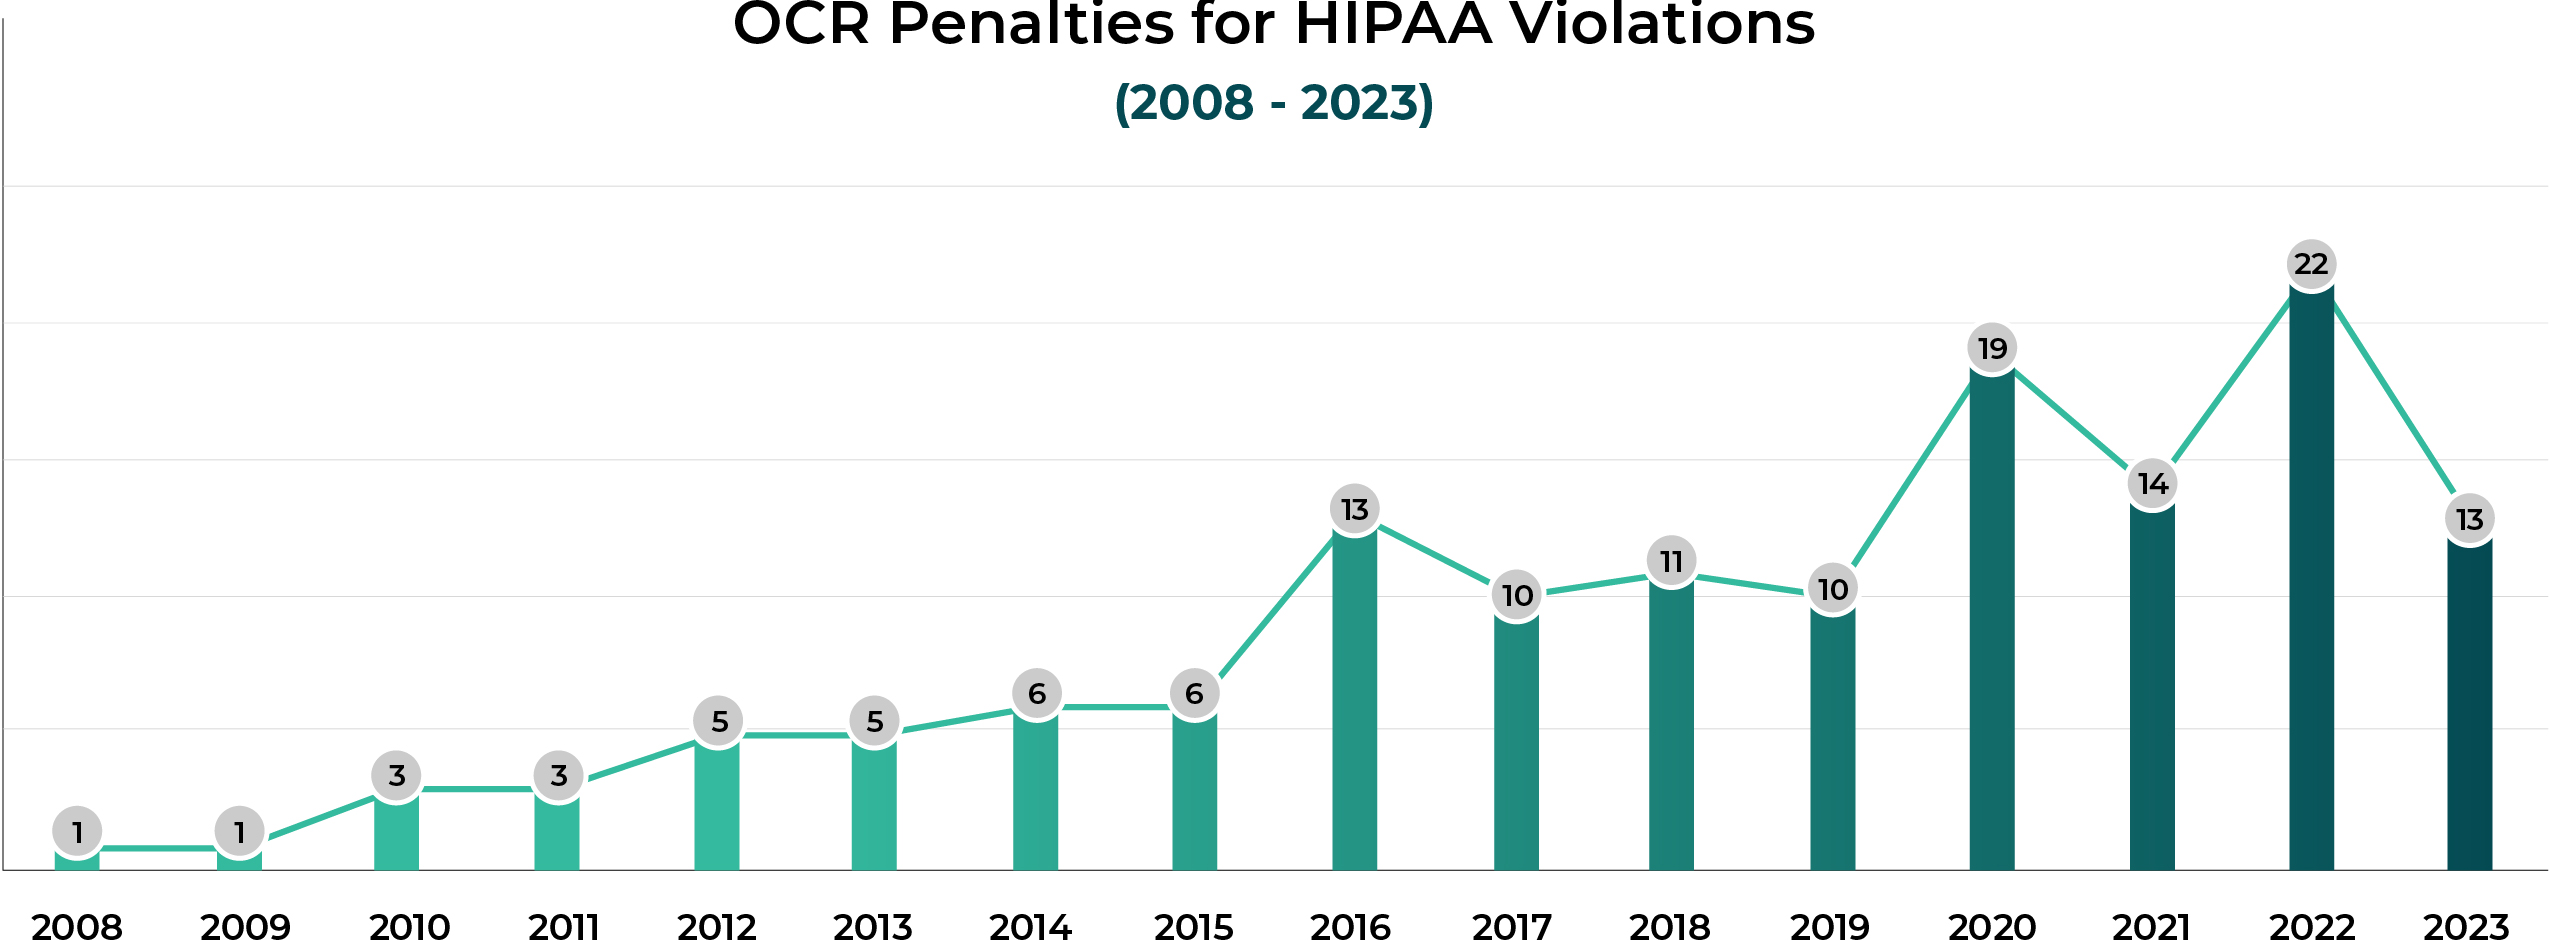 OCR Penalties for HIPAA Vioations